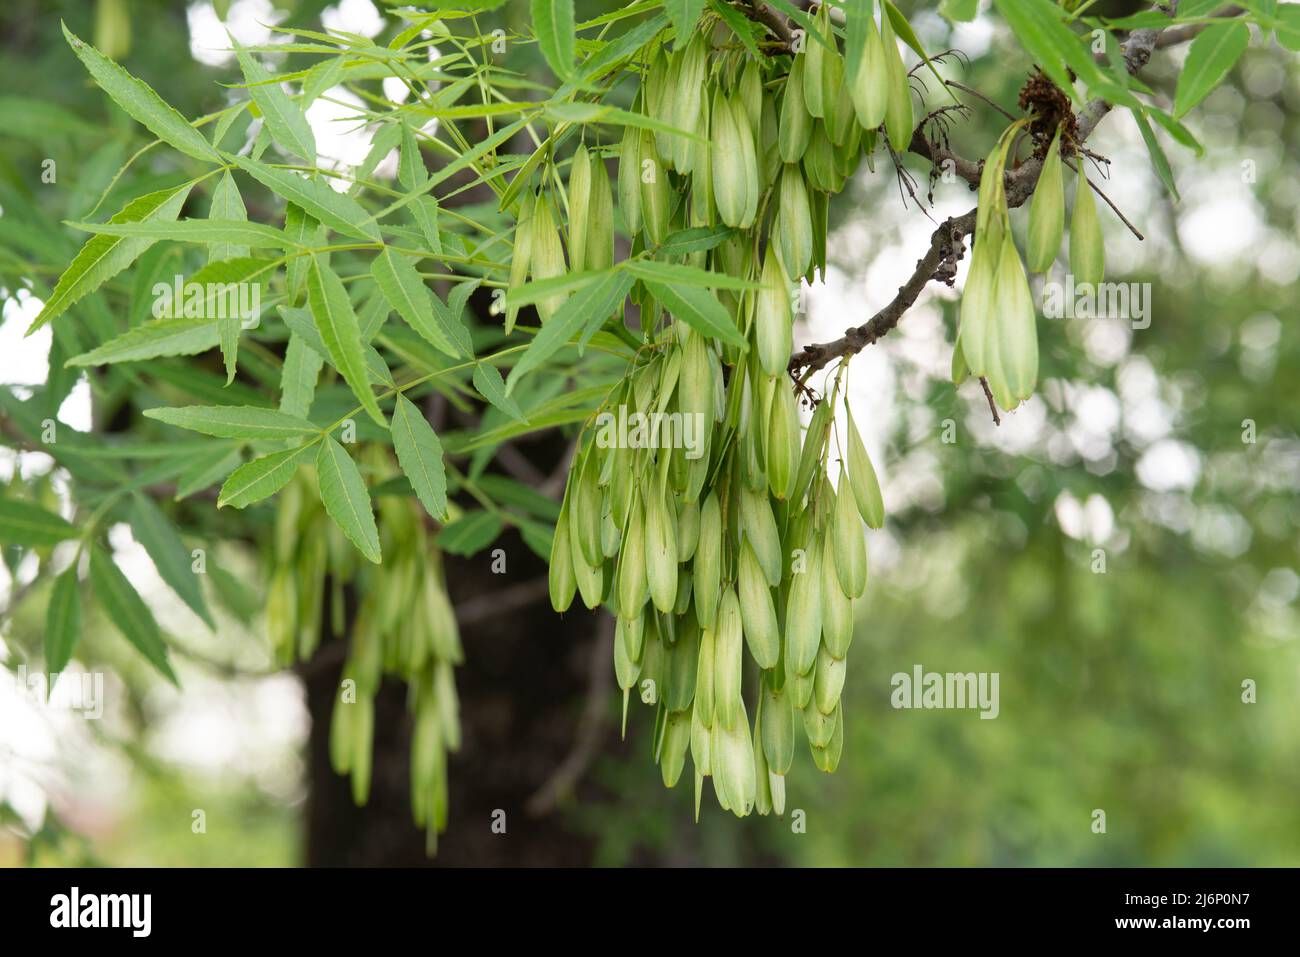 Italy, Lombardy, Ash Tree, Fraxinus Excelsior, Seeds or Fruit Stock Photo